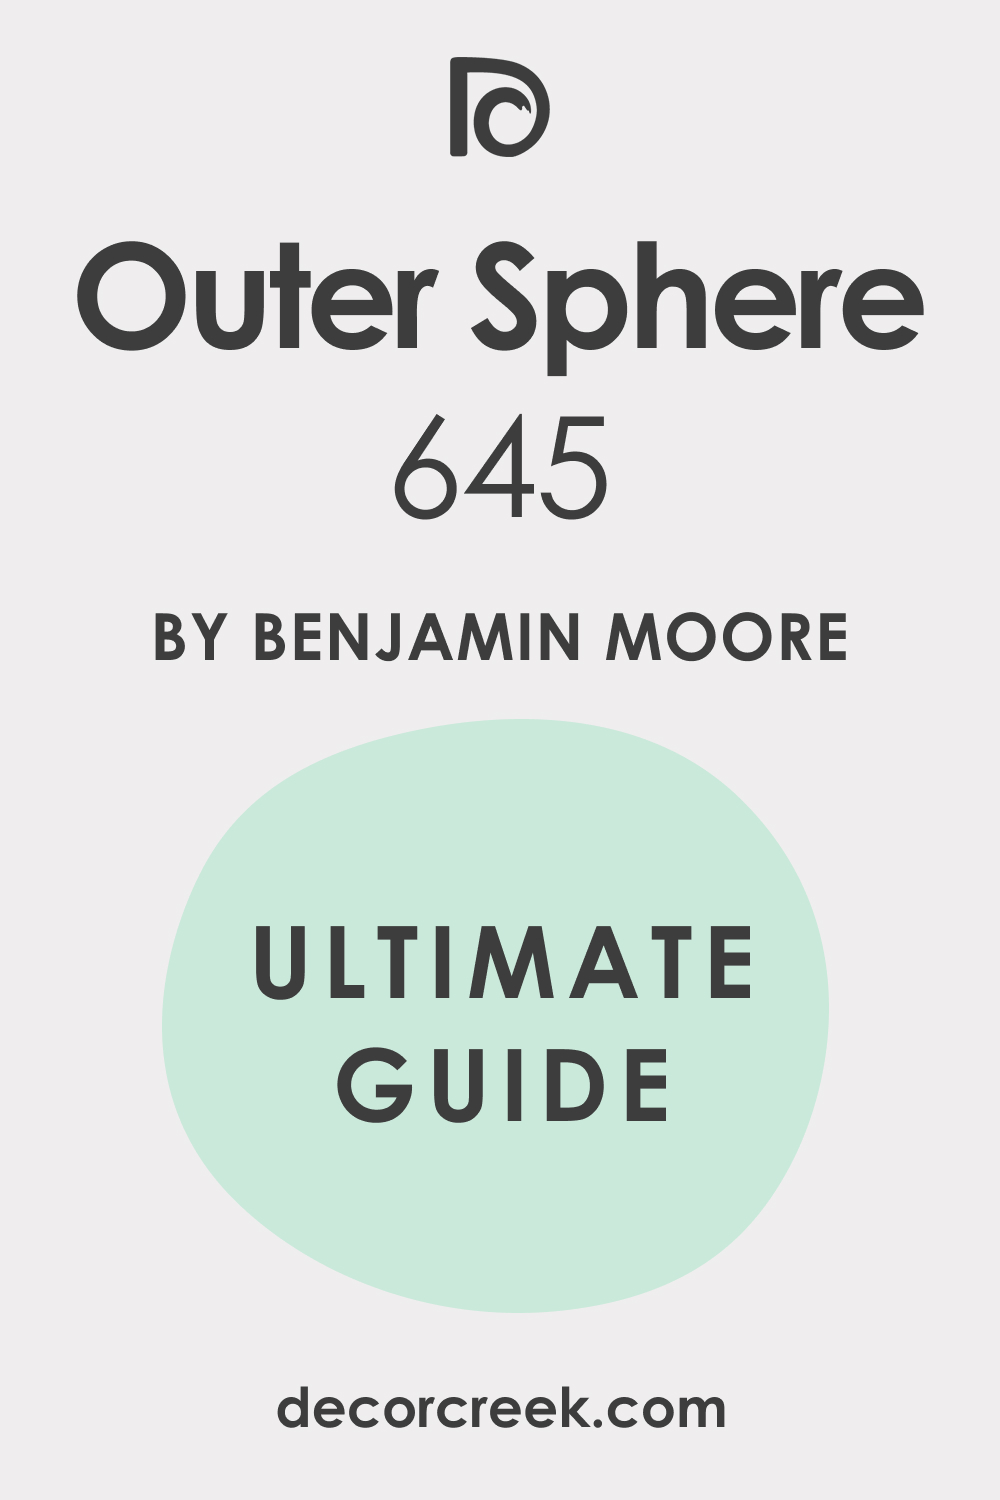 Ultimate Guide of Outer Sphere 645 